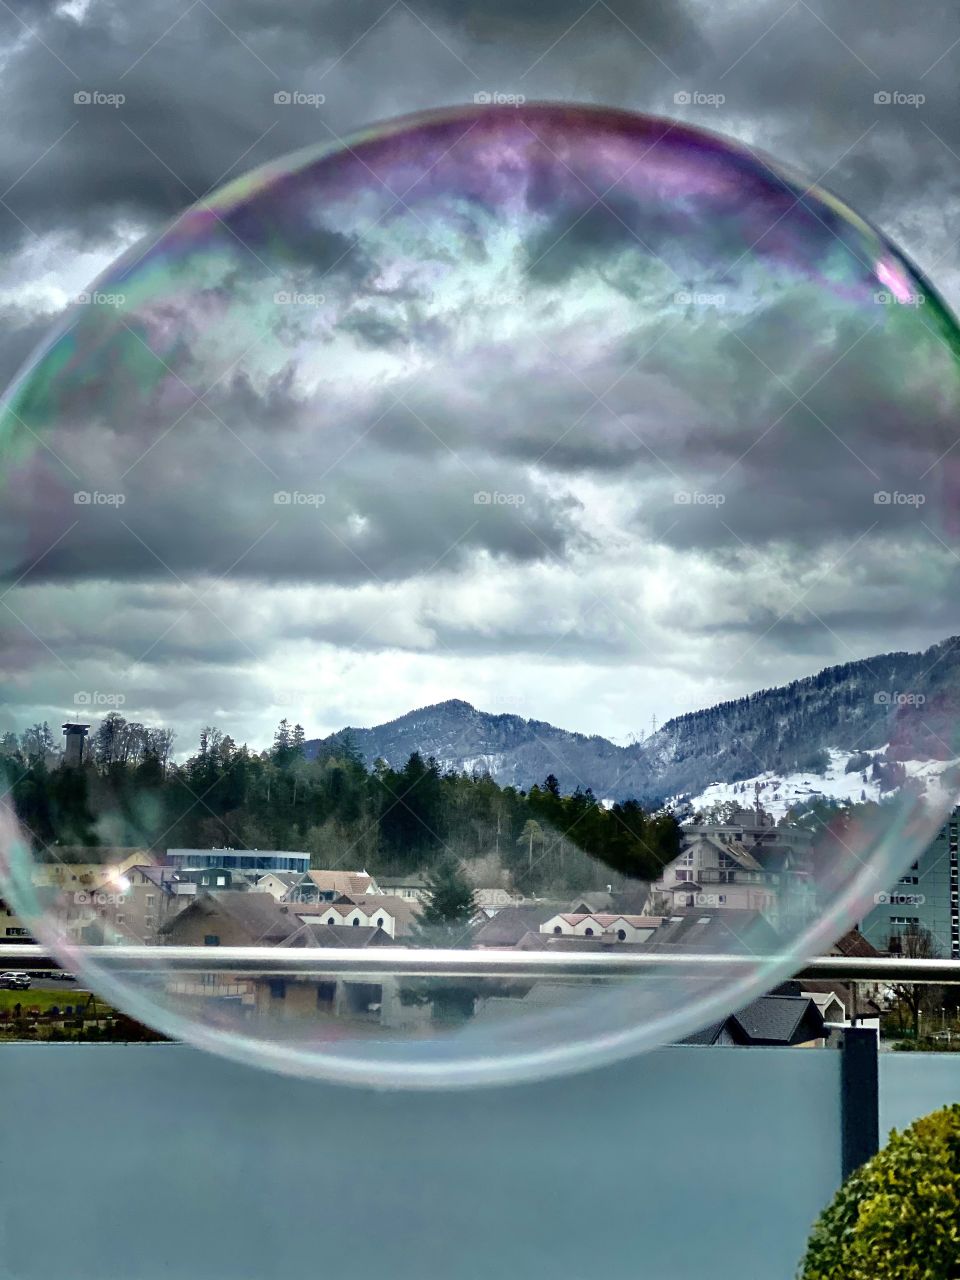 a large soap bubble flying in the air over the Swiss Alps